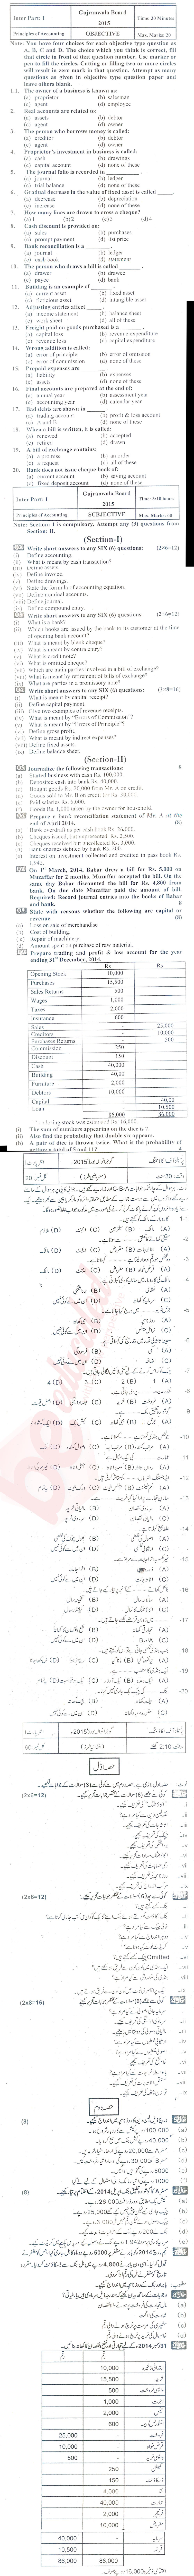 Principles of Accounting ICOM Part 1 Past Paper Group 1 BISE Gujranwala 2015